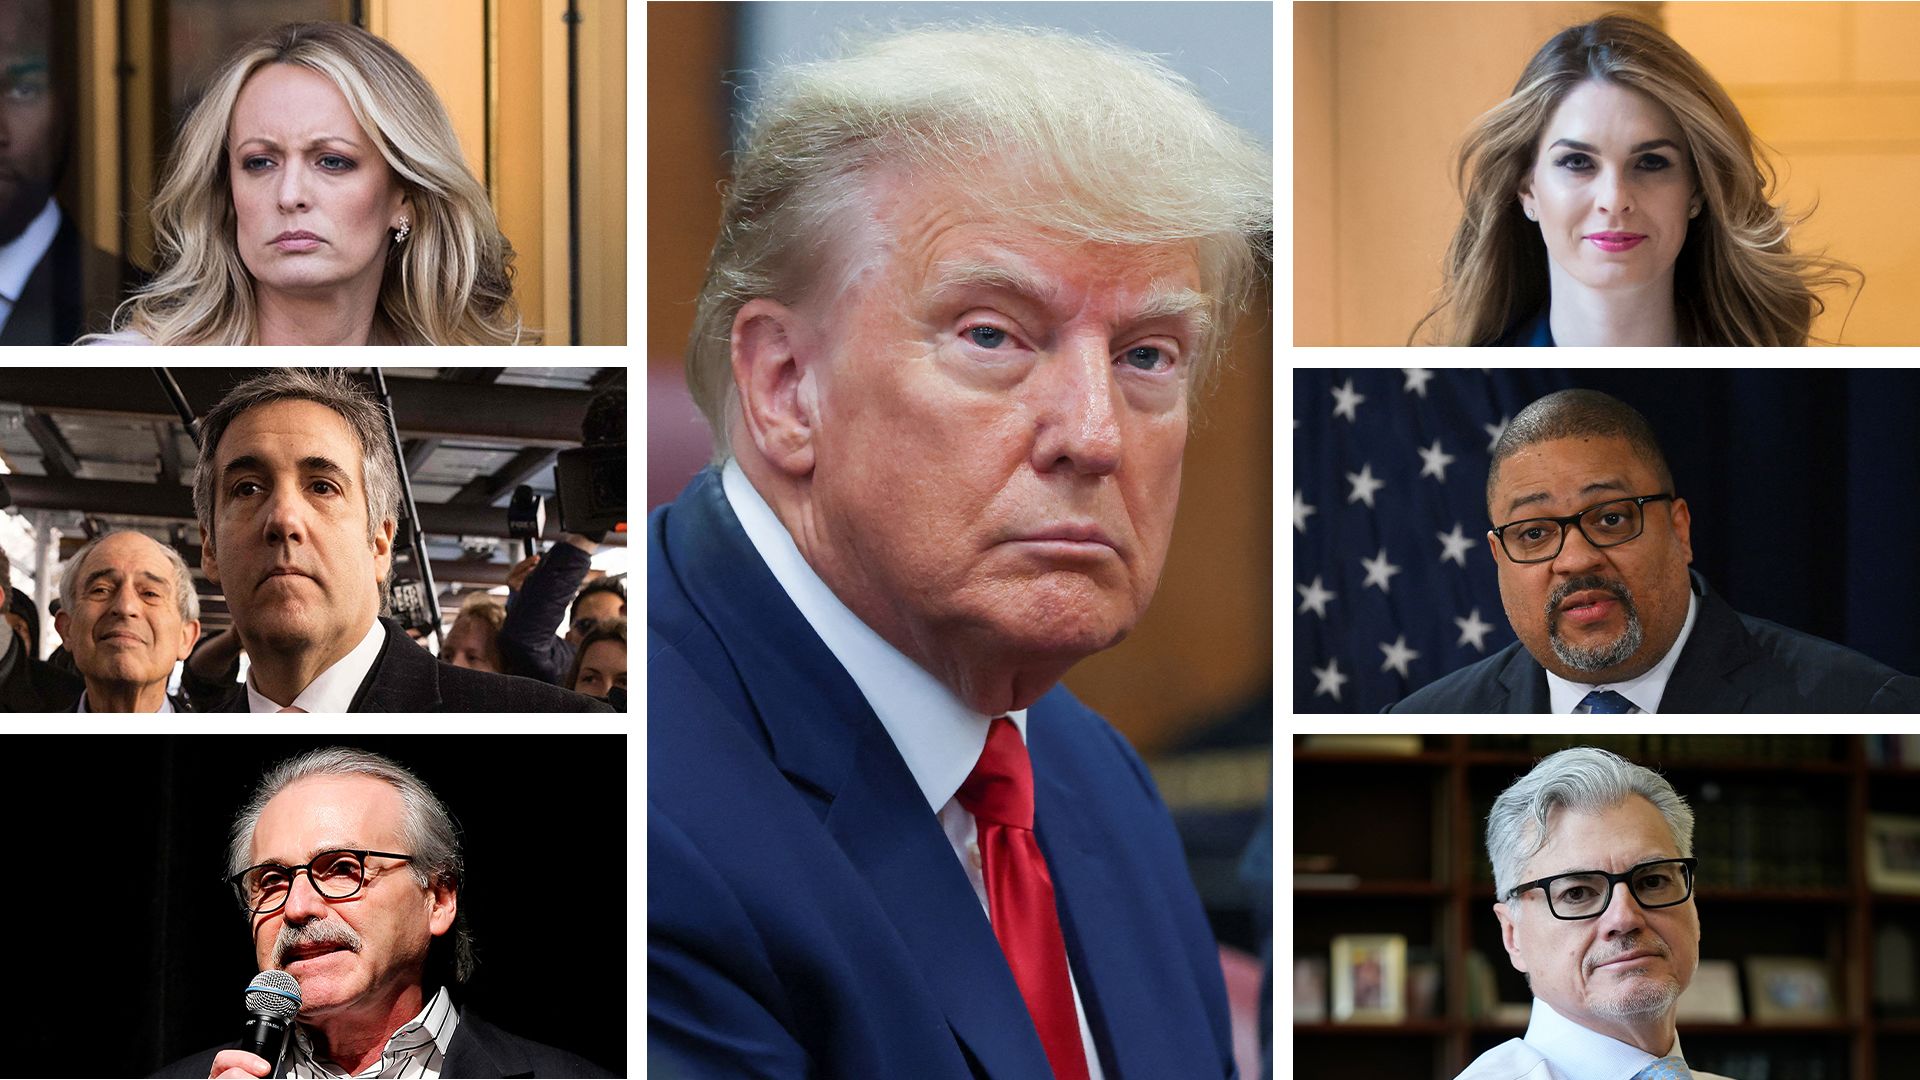 This composite image shows former President Donald Trump (center), Stormy Daniels (top left), Micha...